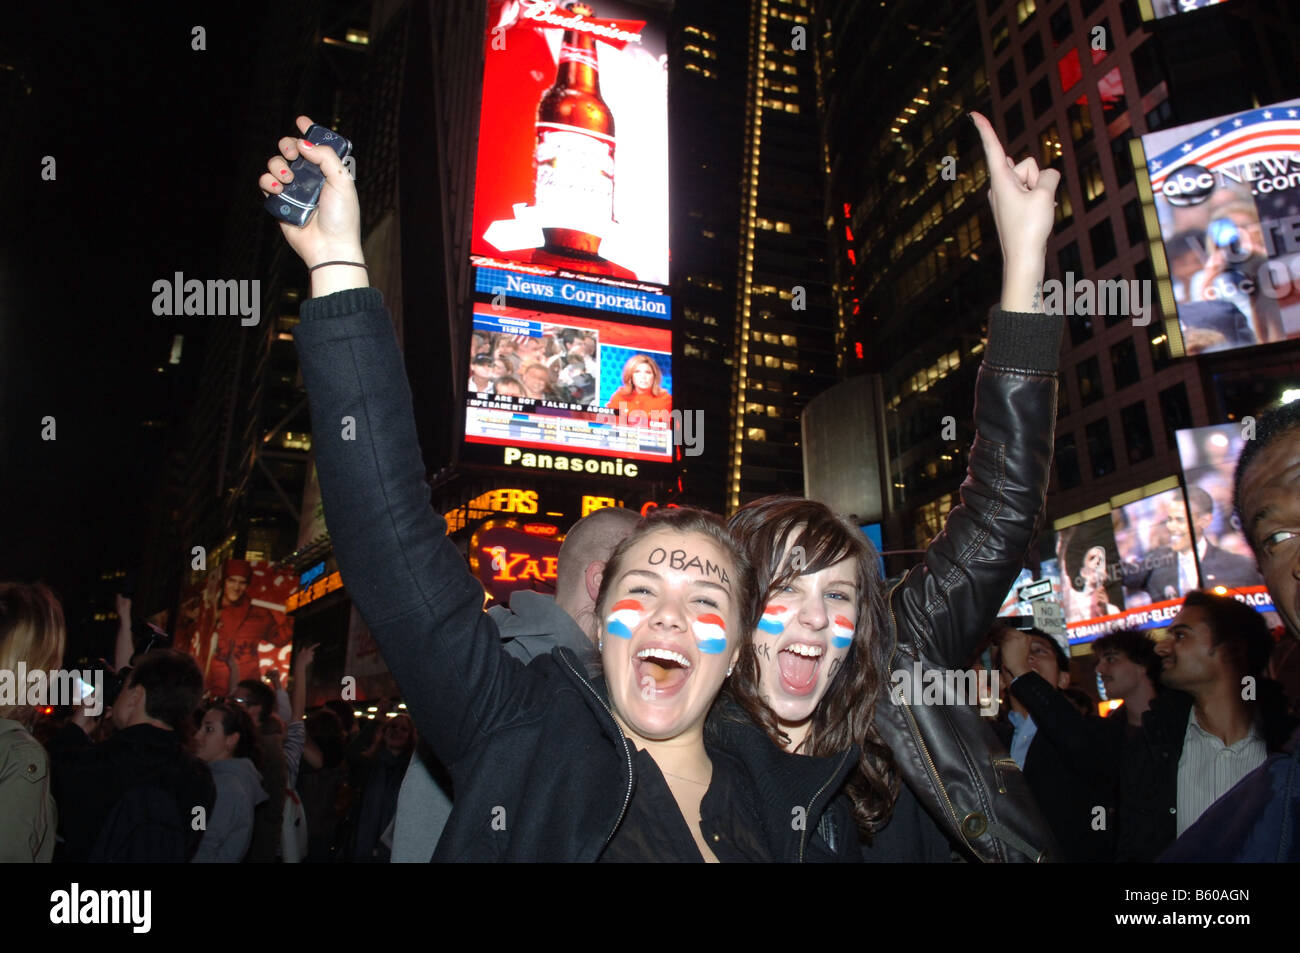 Thousands of Barack Obama supporters watch the election results in Times Square in New York Stock Photo